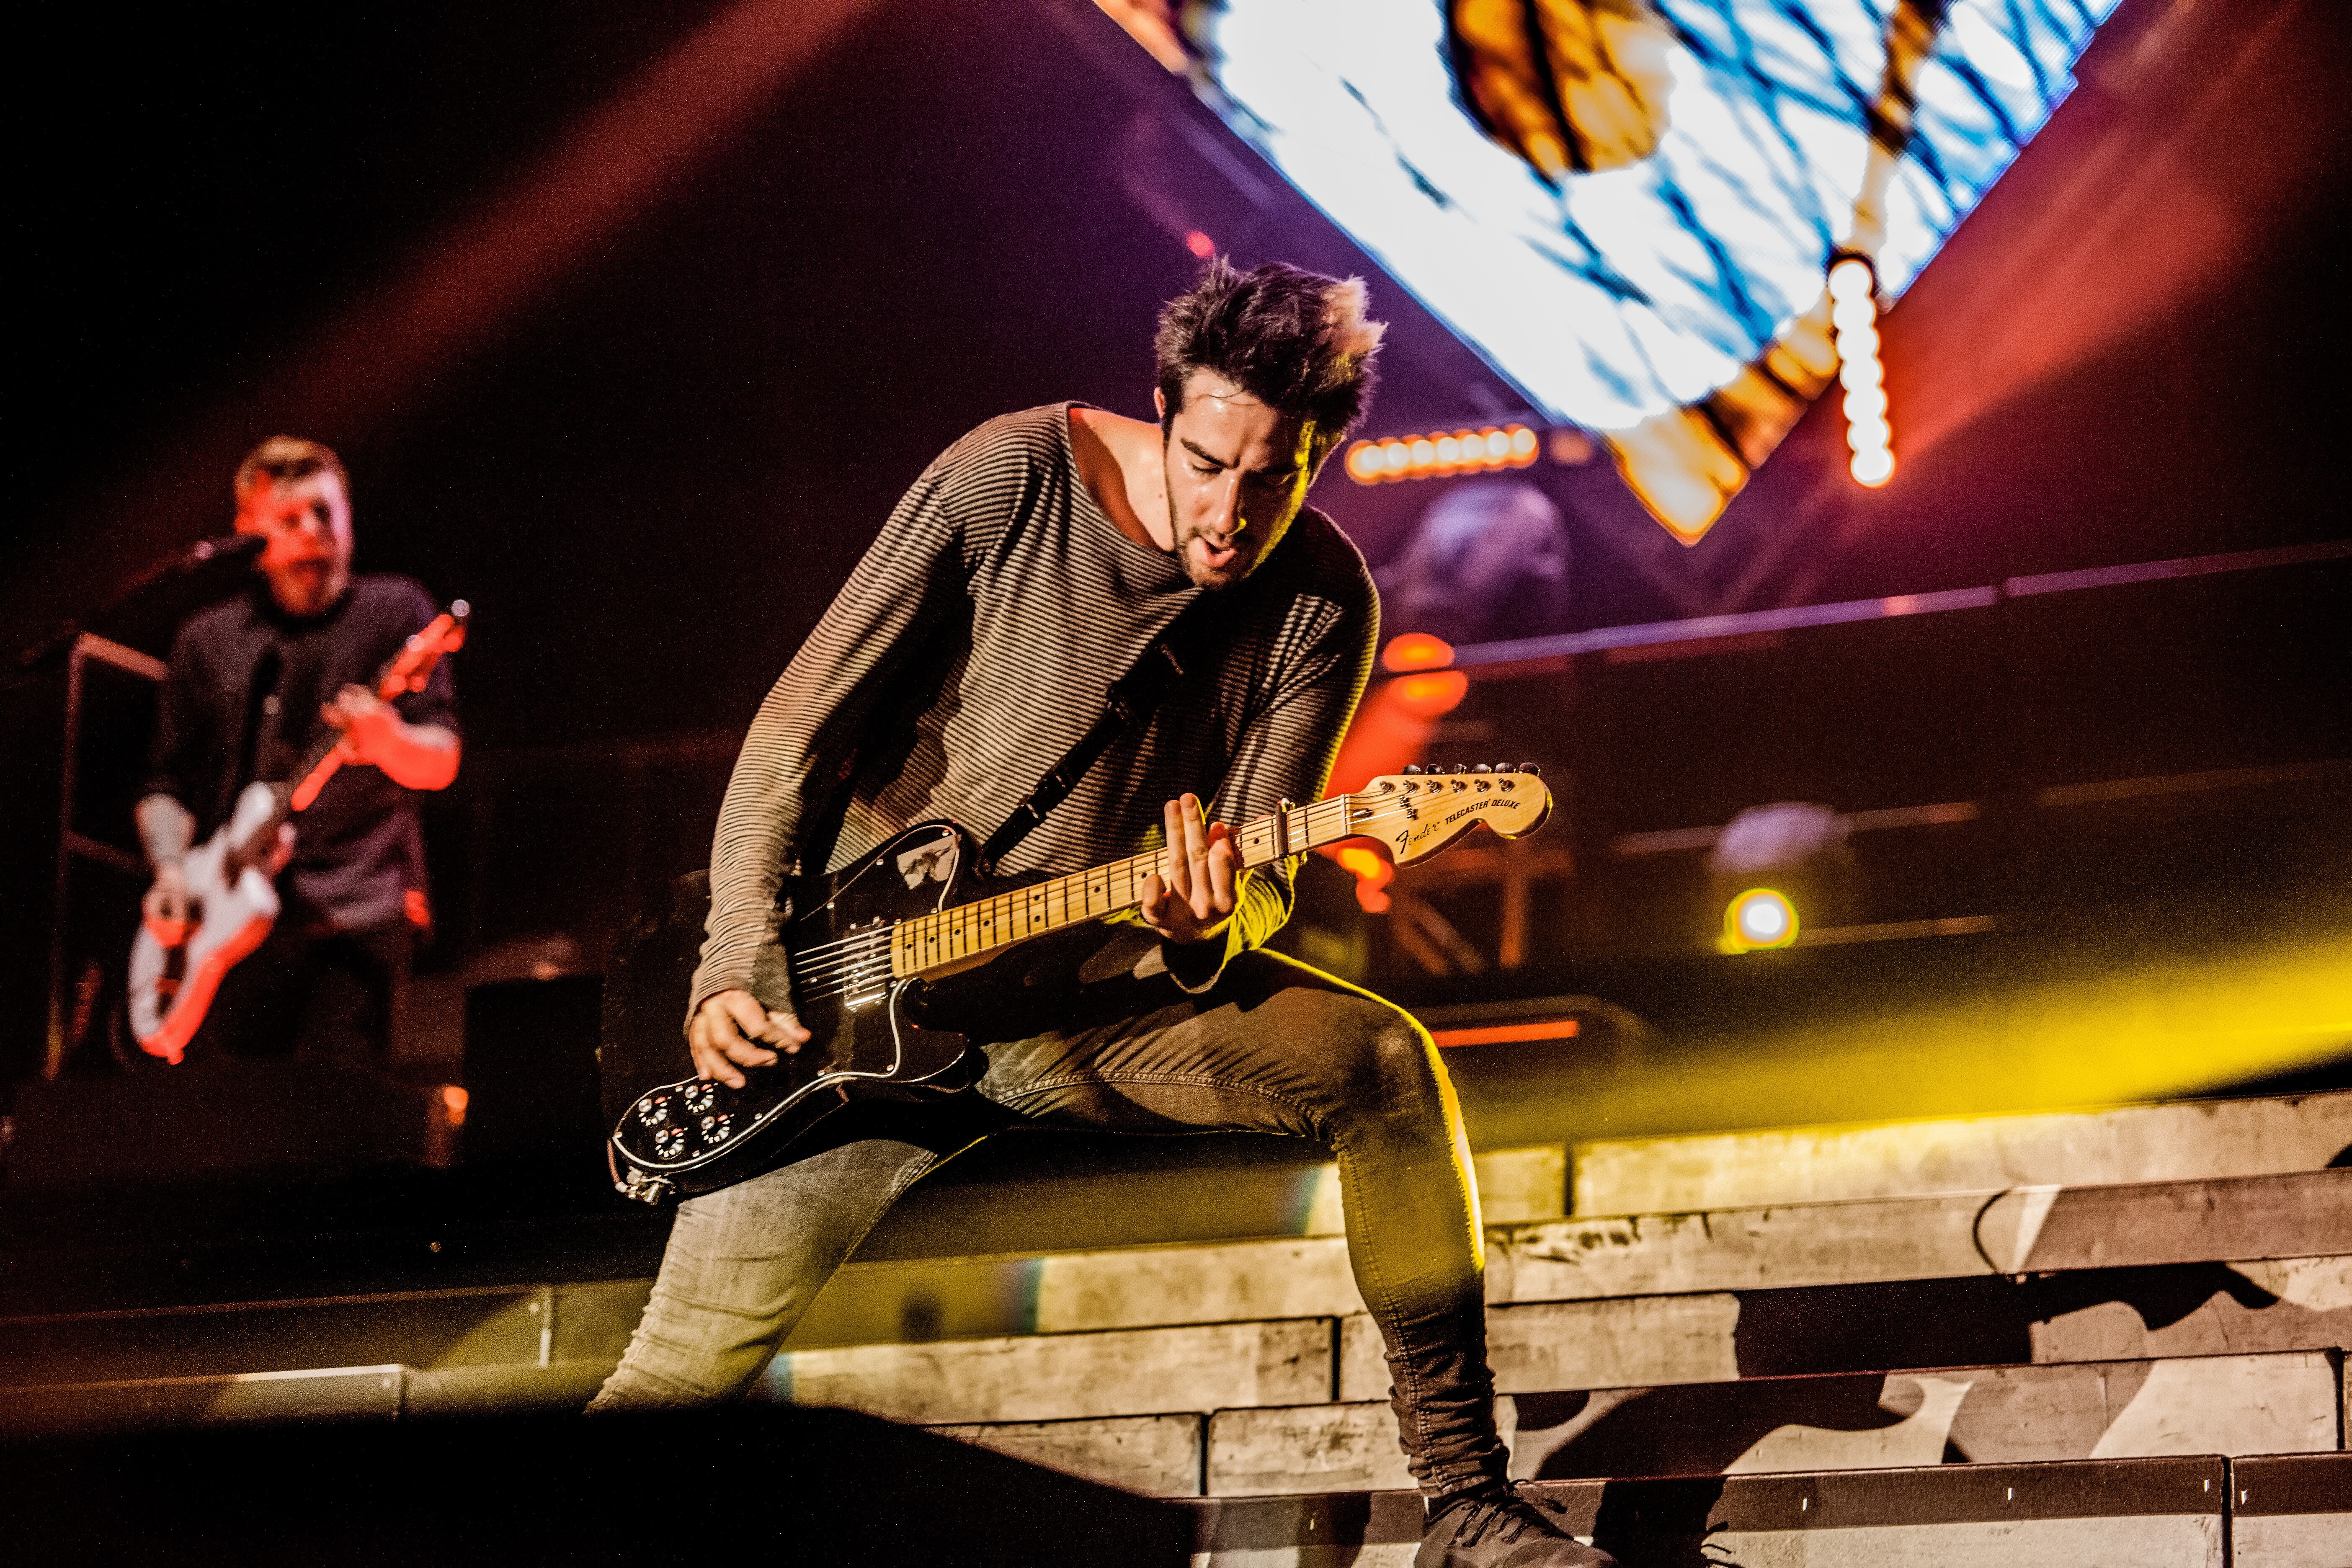 All Time Low perform at the 3 Arena in Dublin, Ireland.